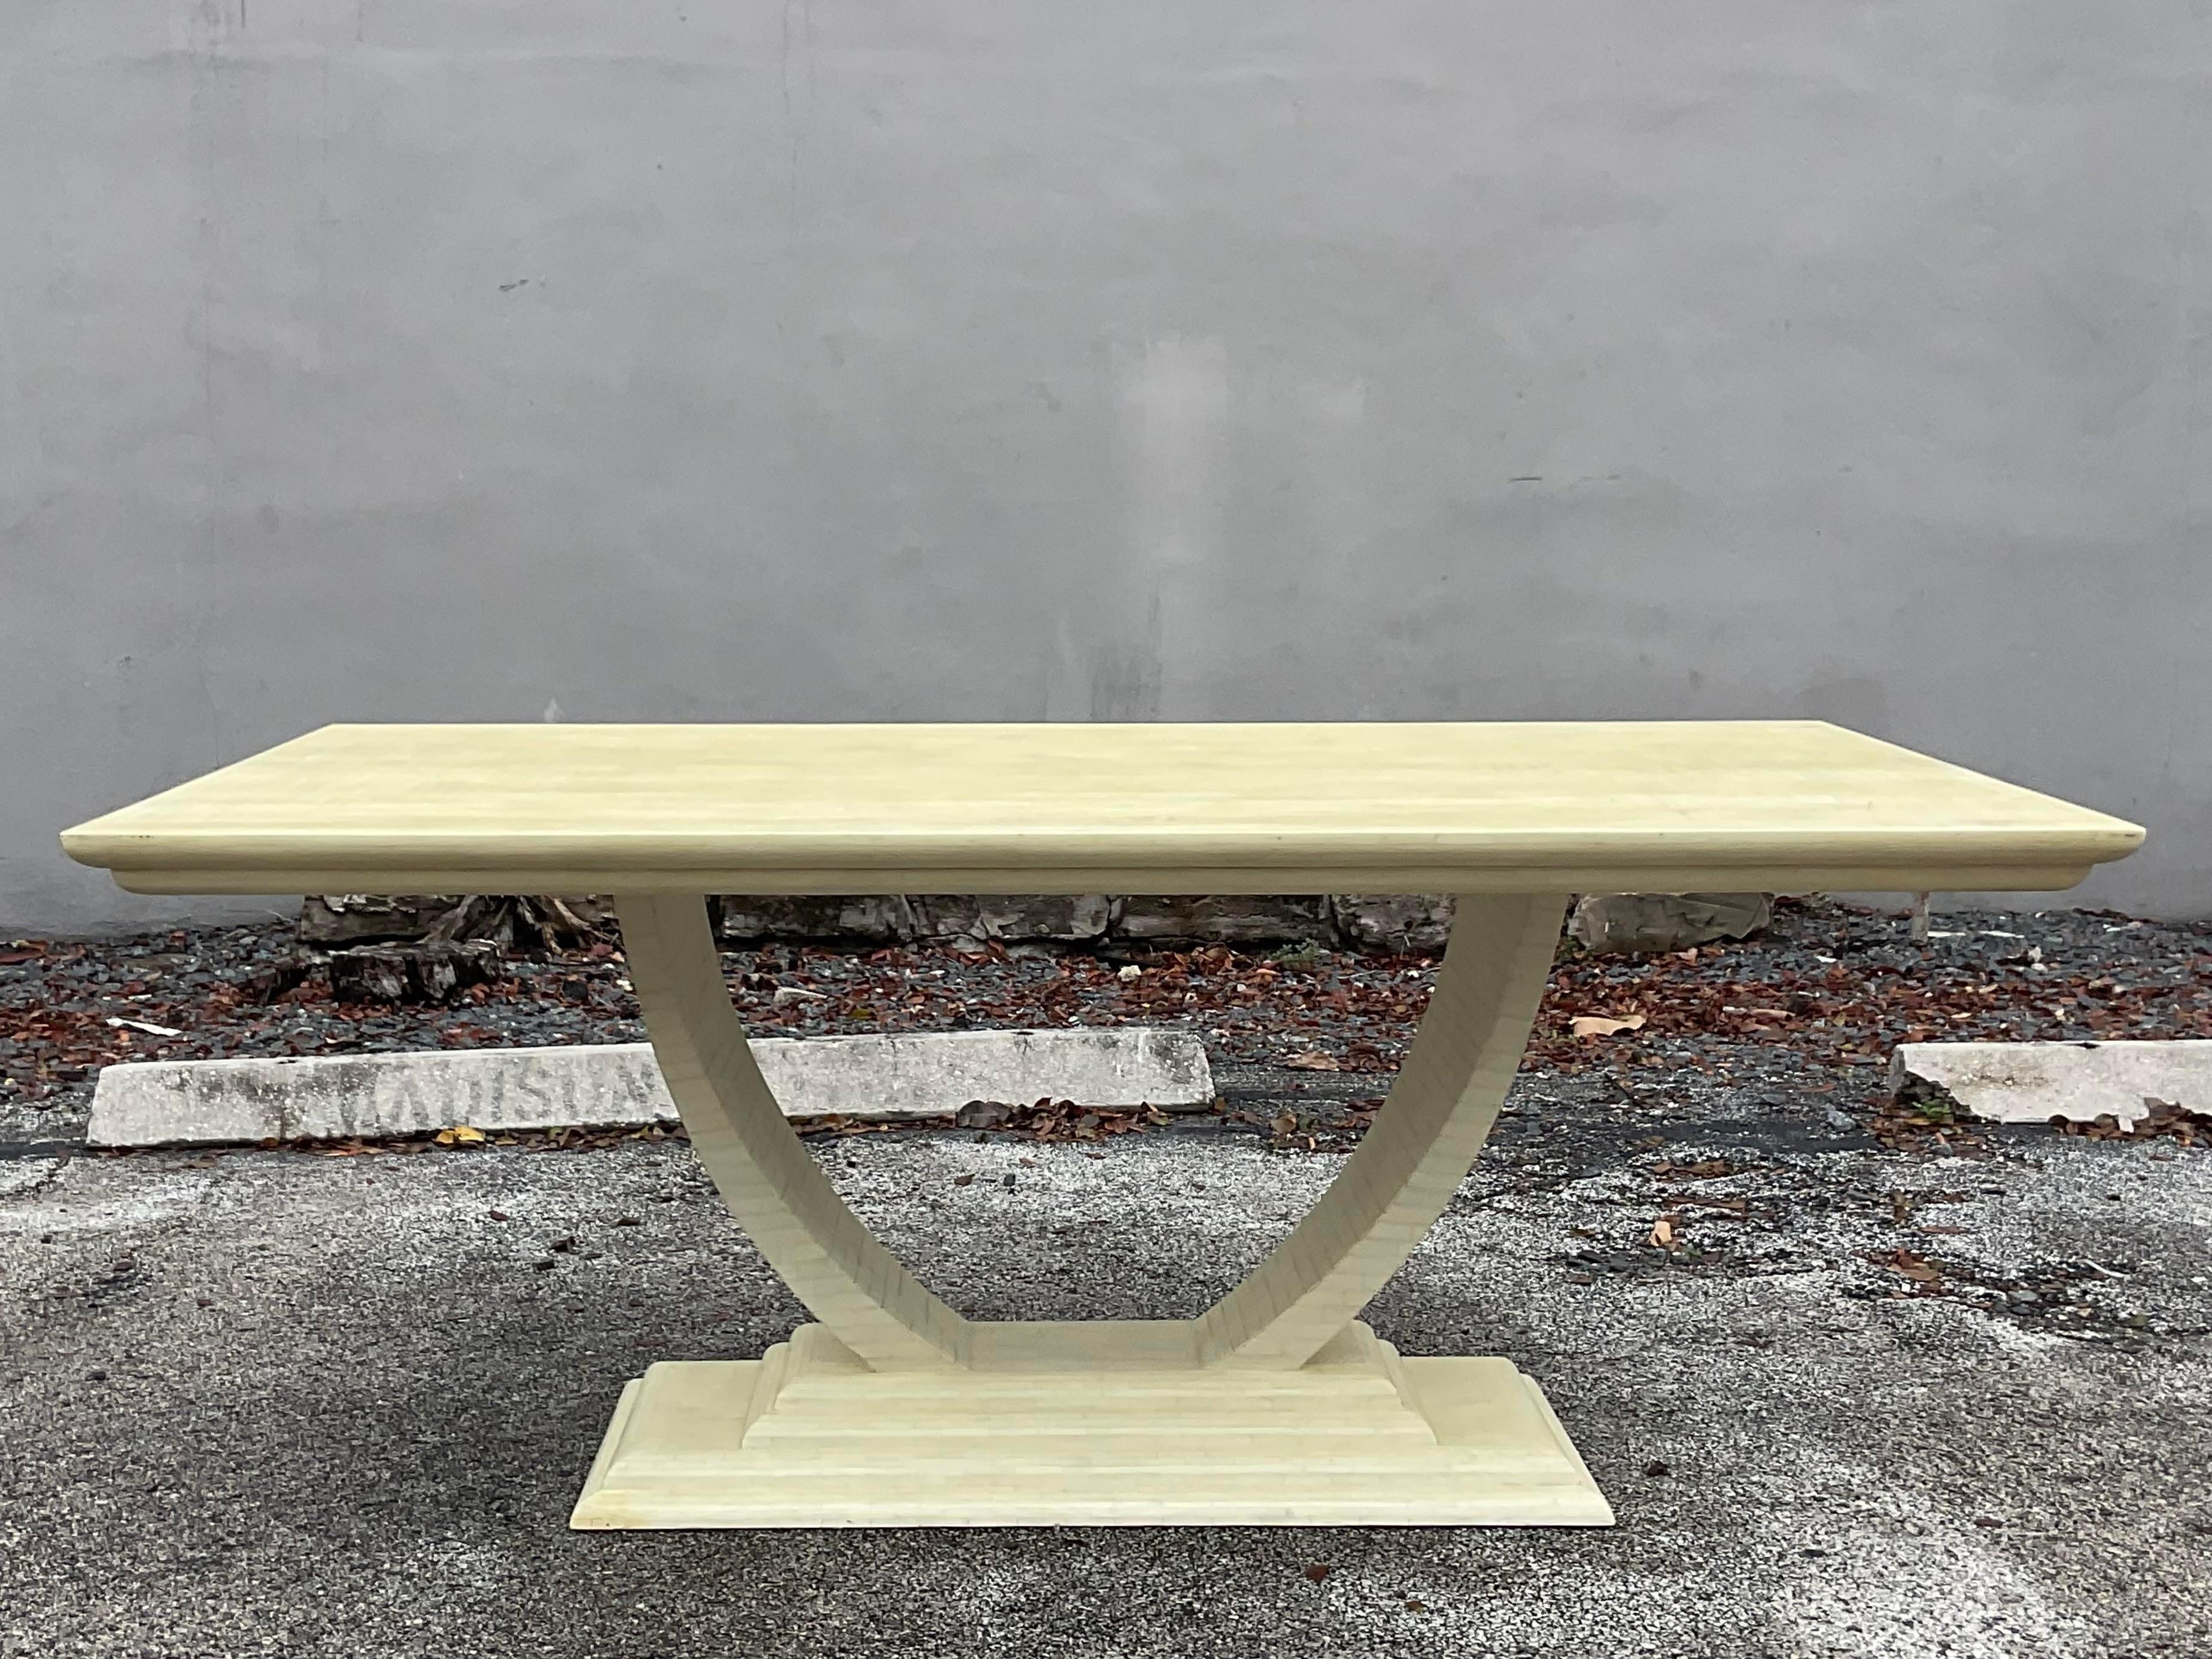 An exceptional vintage Deco dining table. Made by the iconic Jimeco group and tagged on the bottom. Chic Art Deco shape with a contemporary tessellated bone finish. Acquired from a Palm Beach estate.